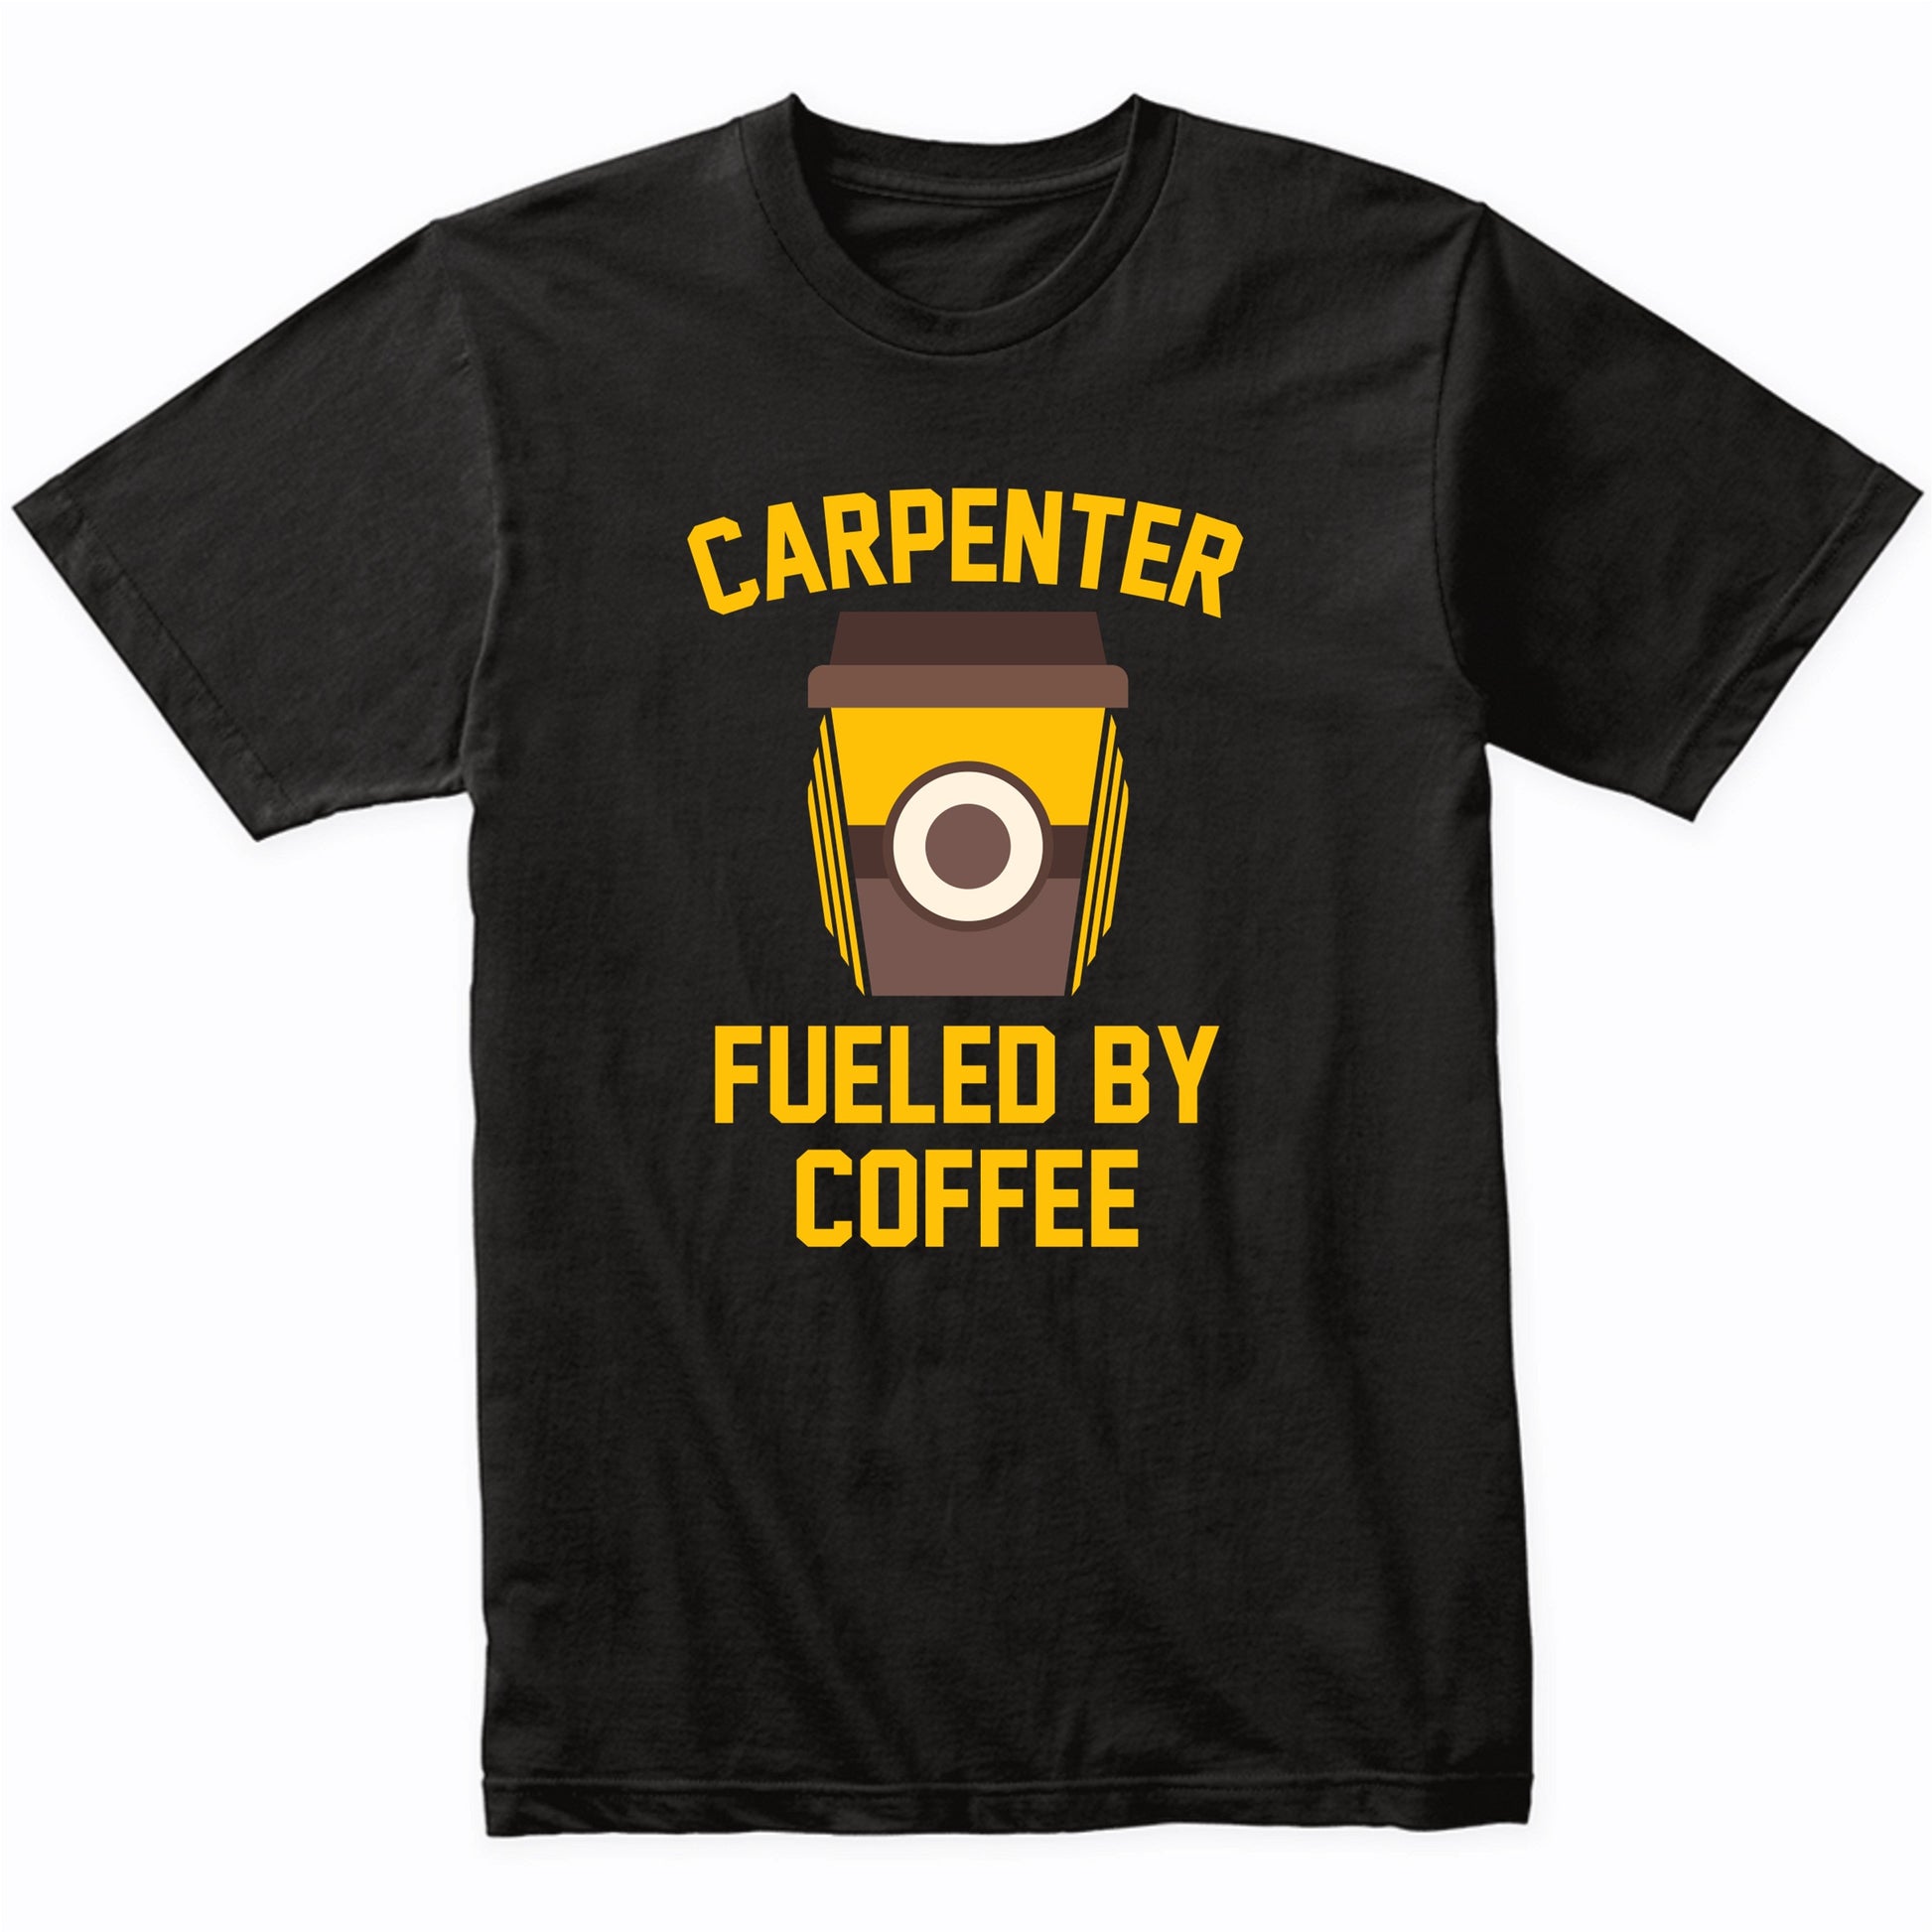 Carpenter Fueled By Coffee Funny Carpentry Shirt